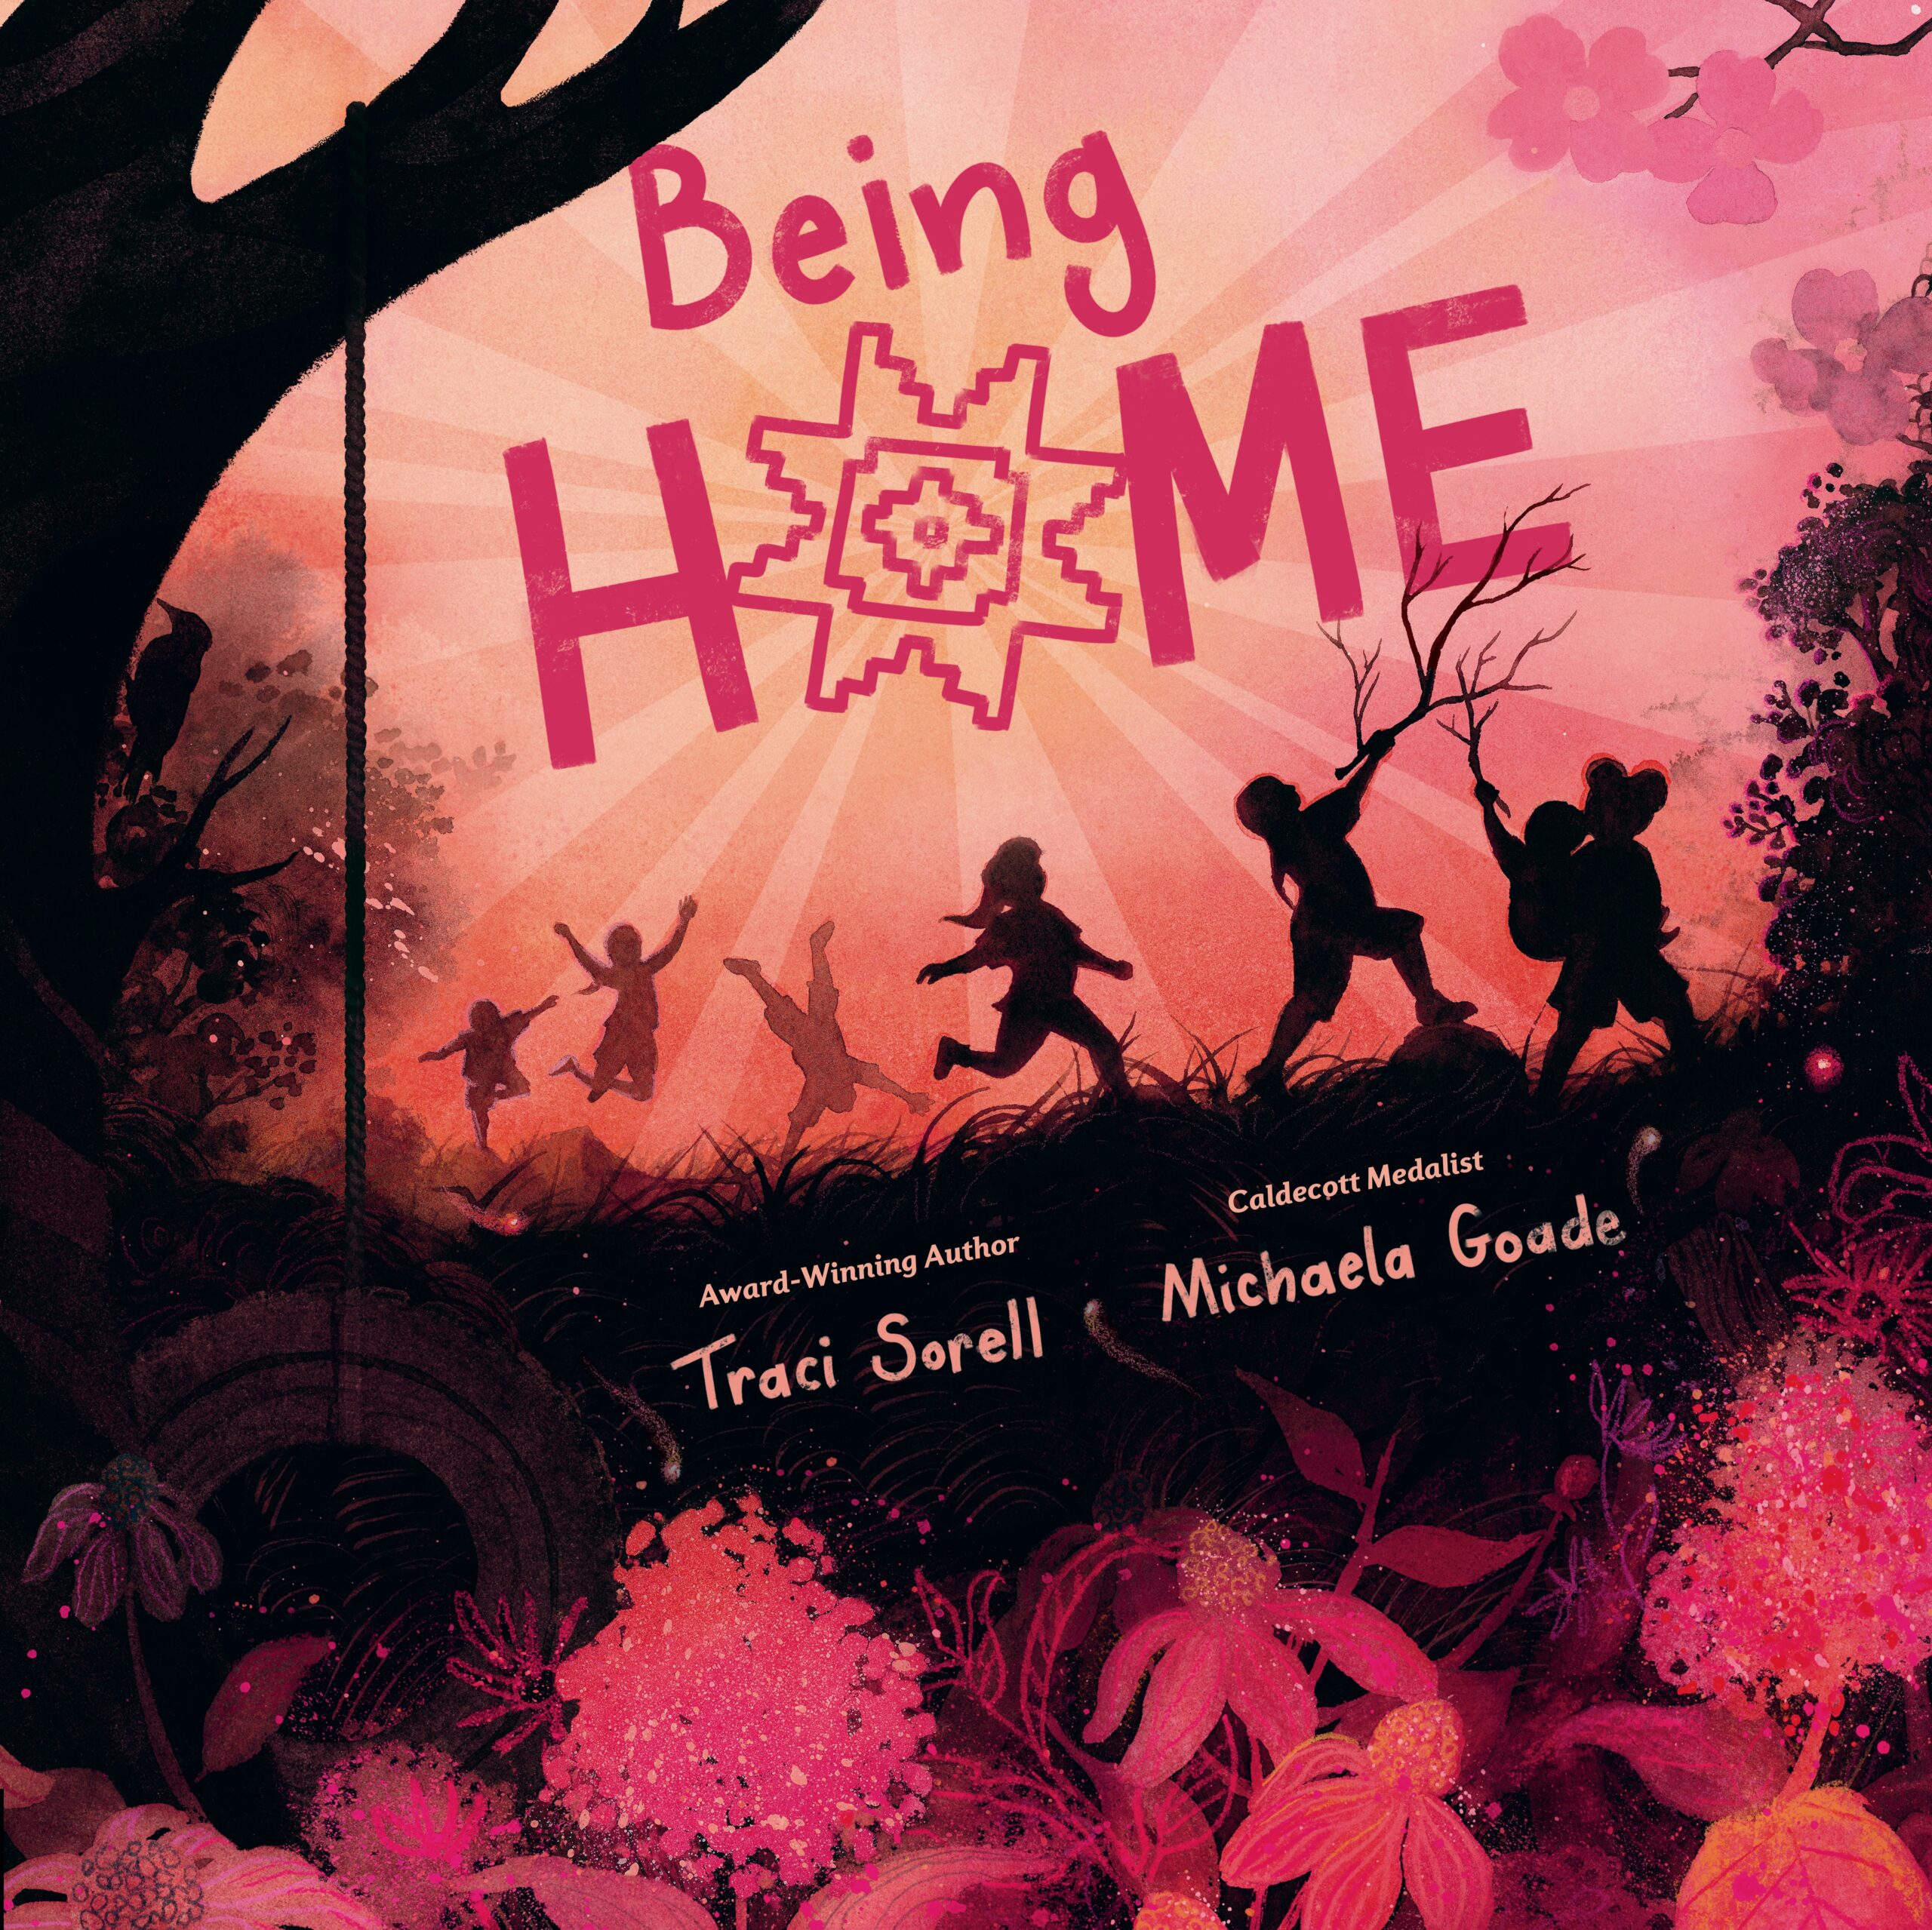 Book cover of Being Home